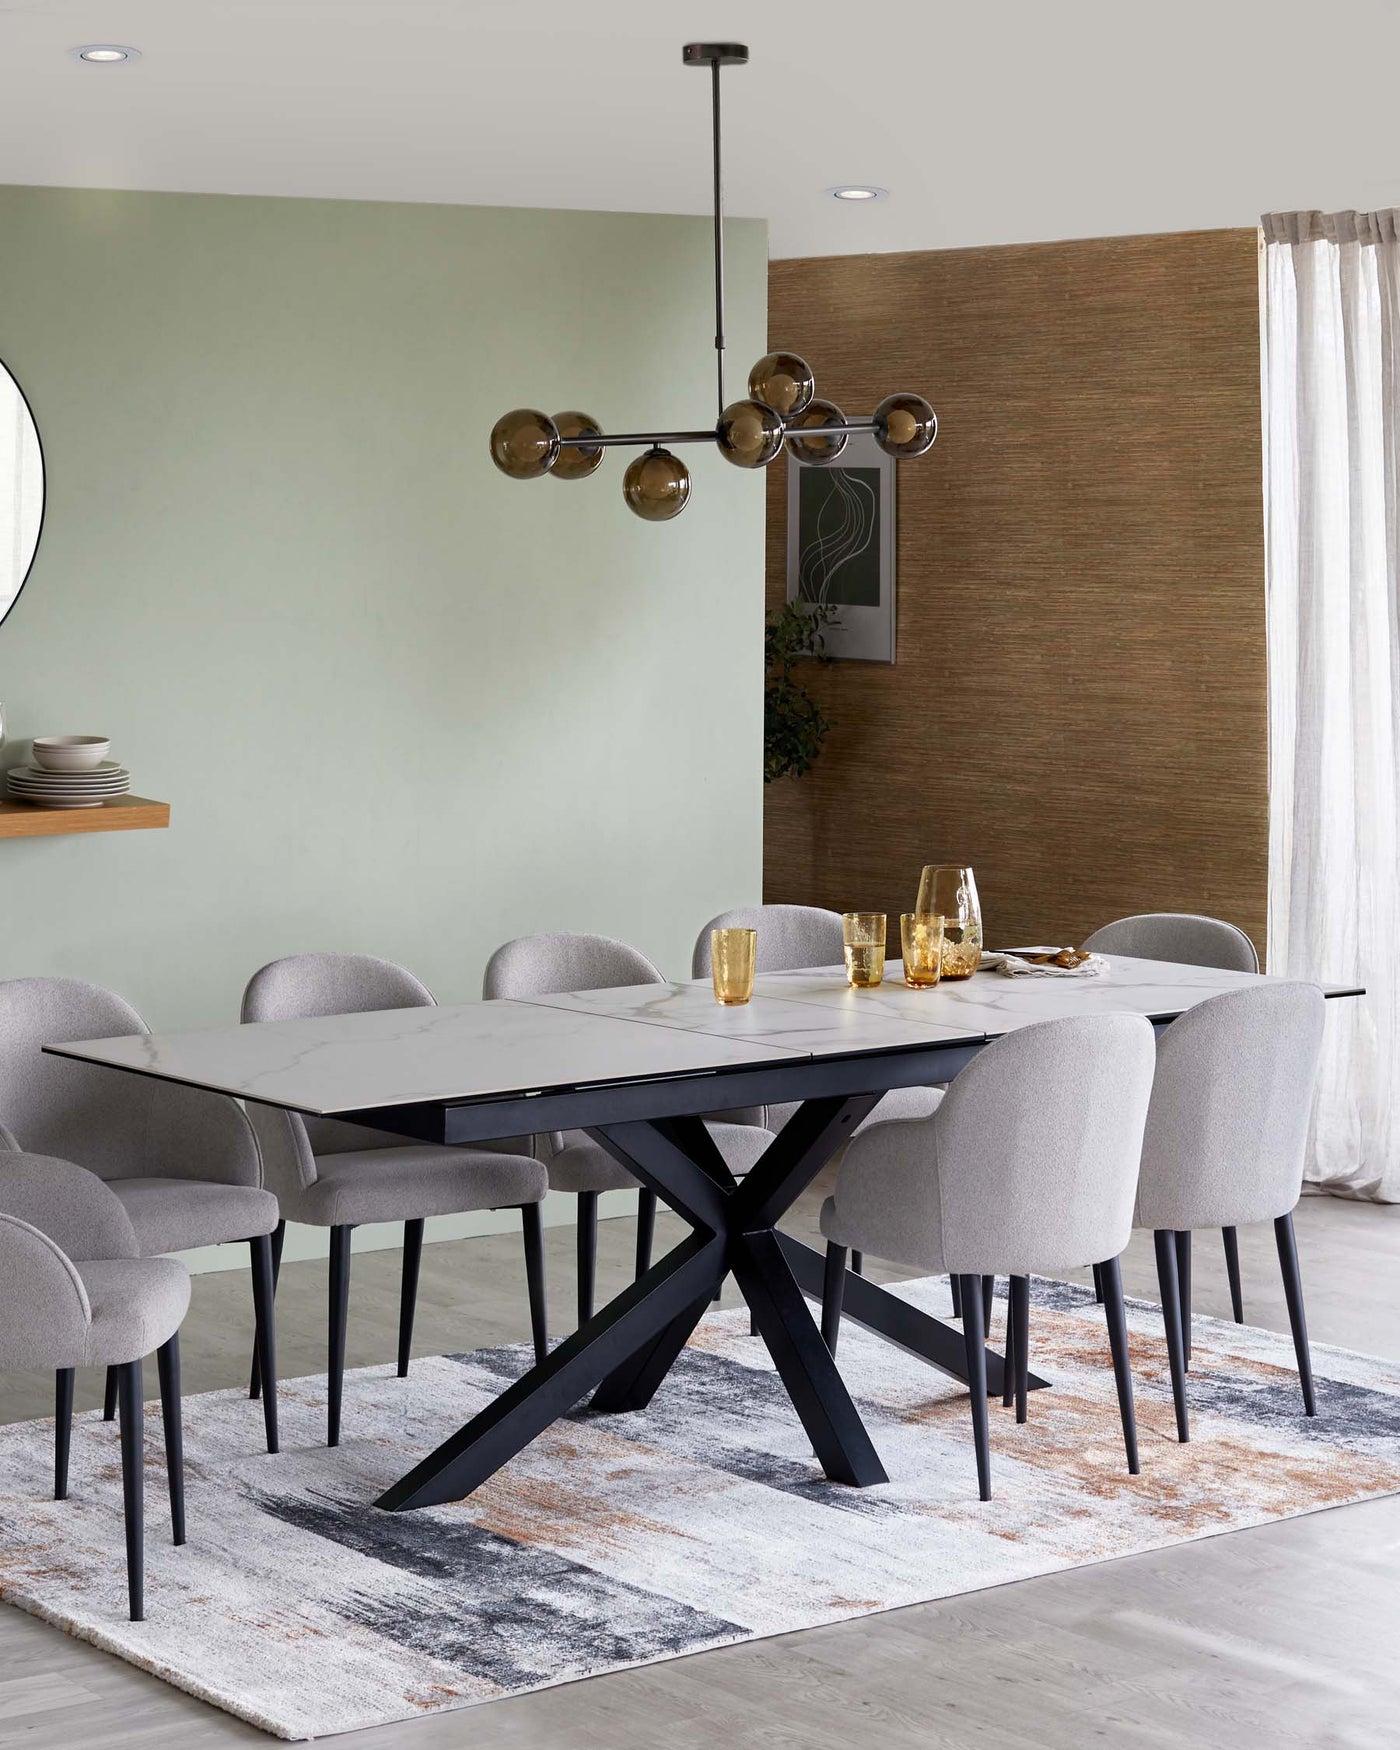 Modern dining room with a black and white marble rectangular table and six grey upholstered chairs with black legs. A patterned area rug under the table provides a contrast with its sandy and grey hues, and a minimalist chandelier with spherical, tinted glass light fixtures hangs above the table.